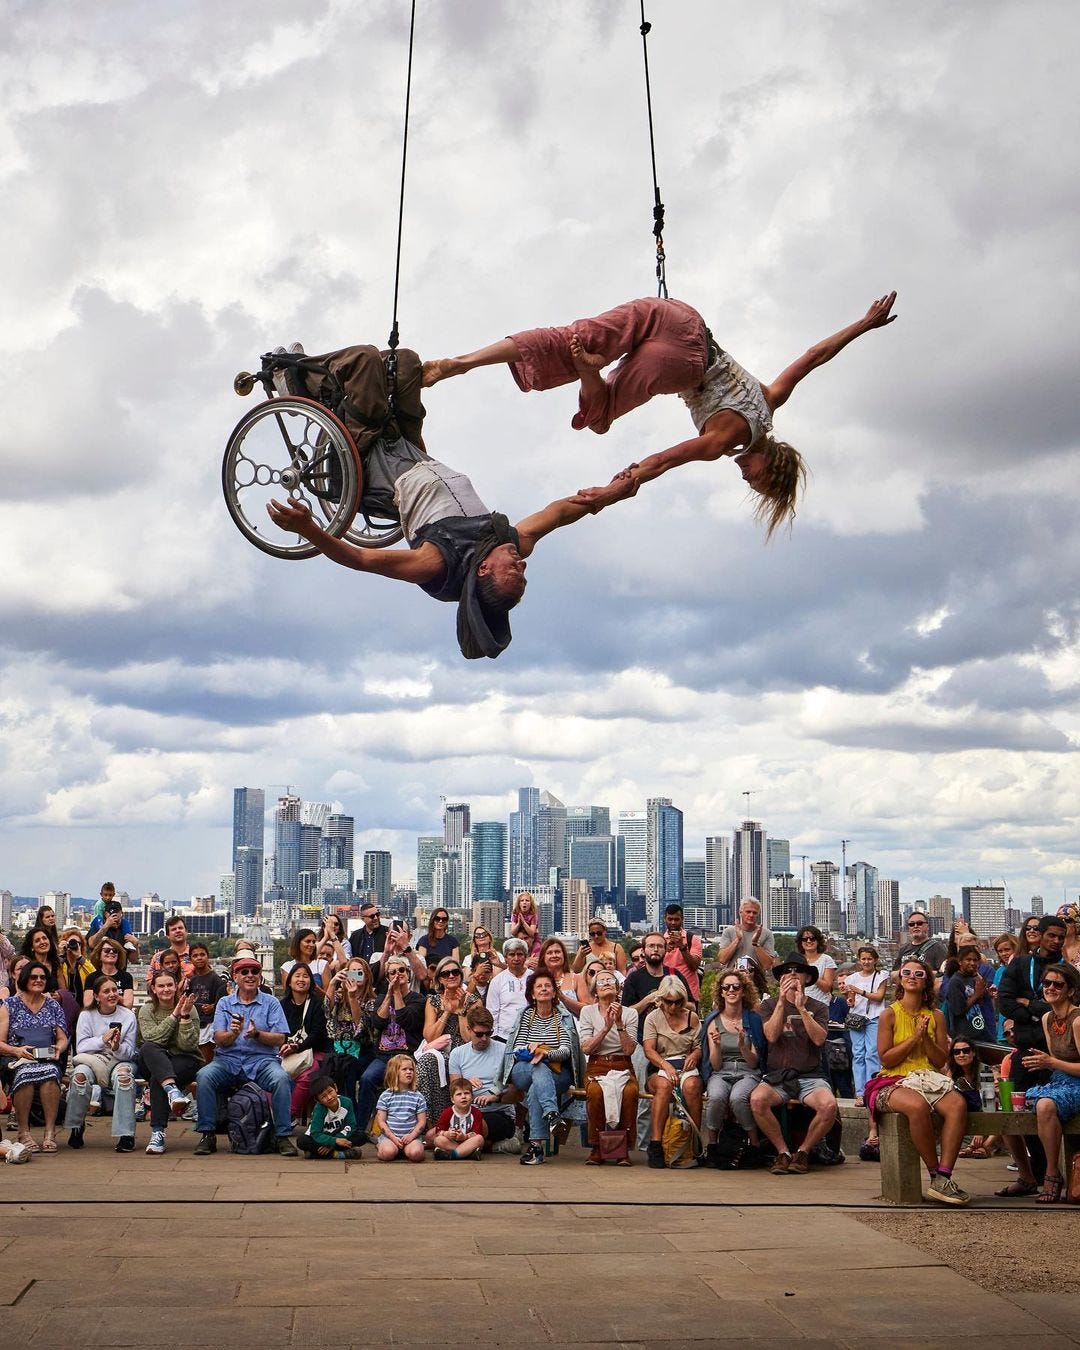 Two dancers, one in a manual wheelchair, suspend from cables that stretch out of the frame above. They are upside down over a hard stone surface with people on the ground looking up in awe, against a city skyline of buildings and dense, fluffy white clouds.